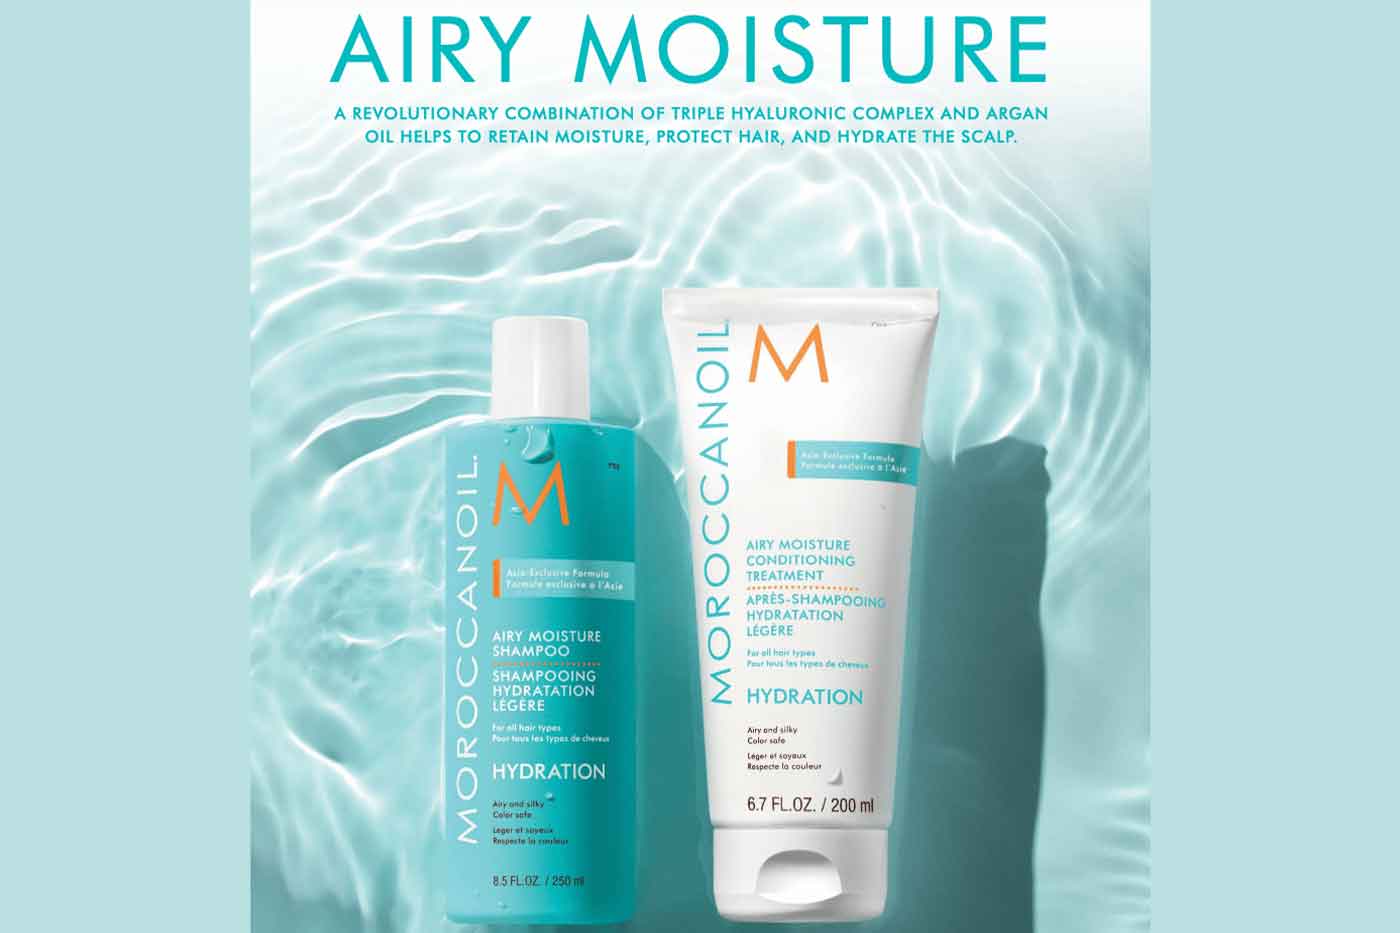 Moroccanoil launches a new haircare line